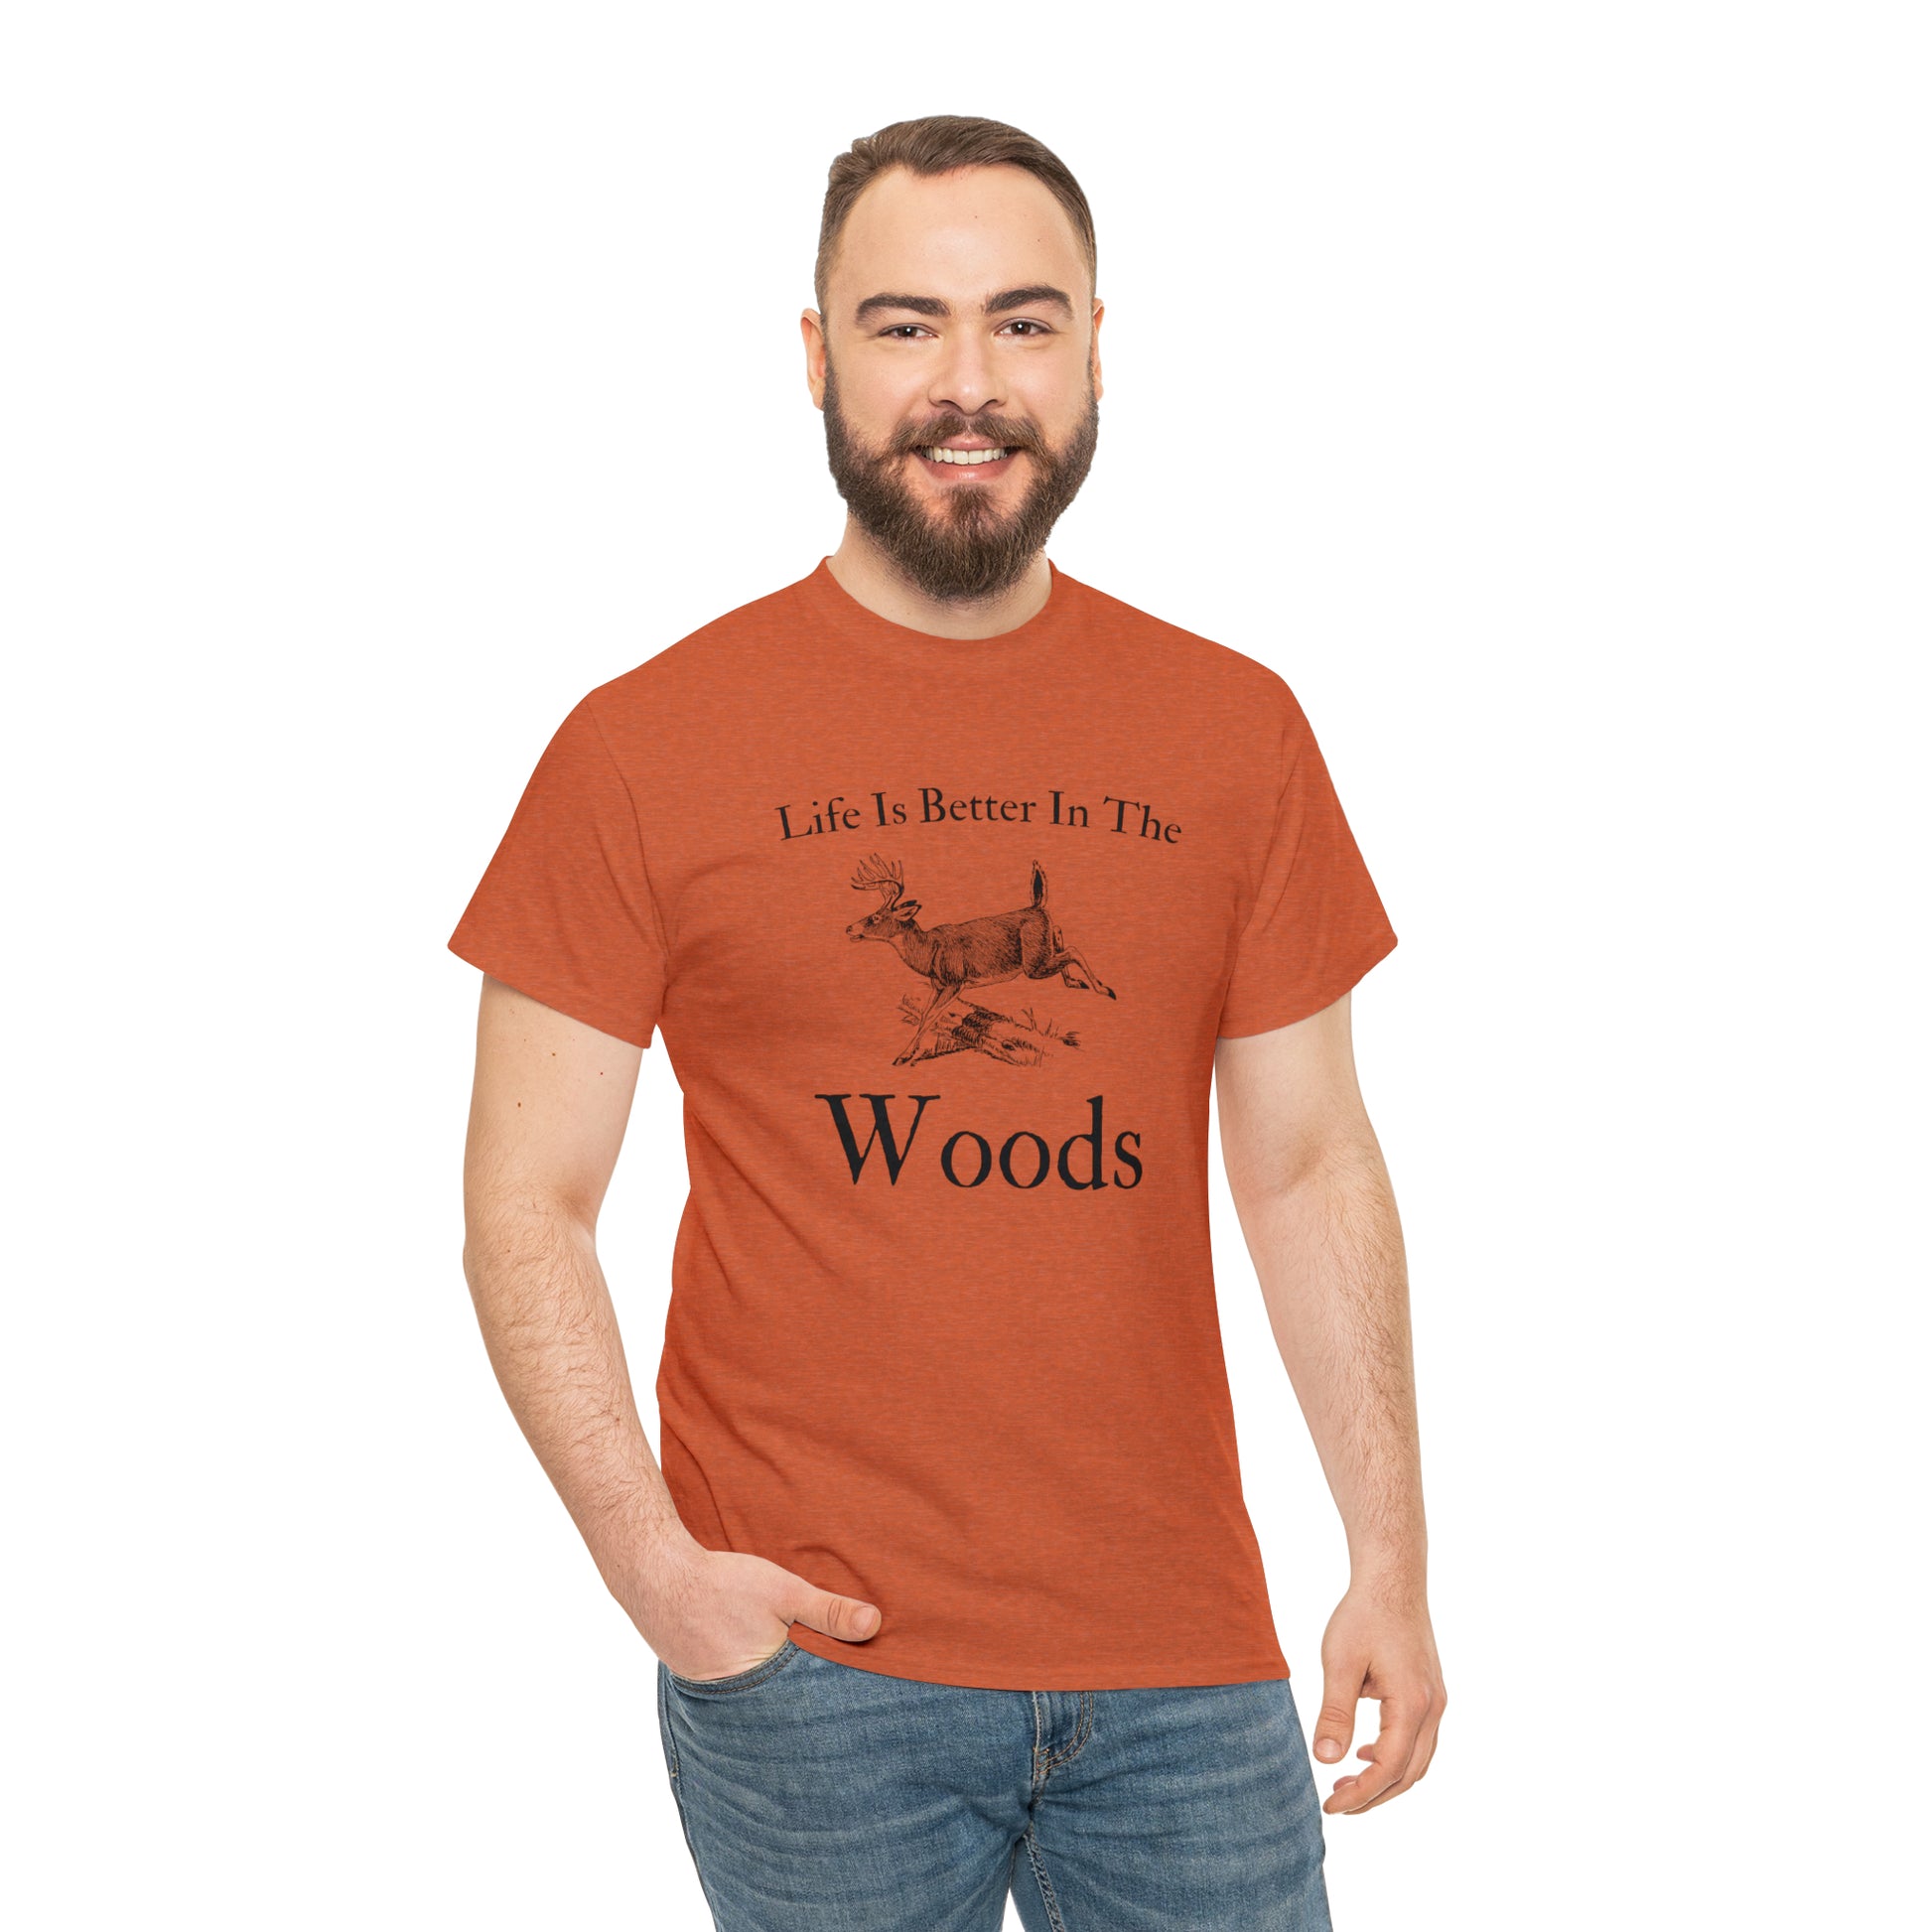 "Life Is Better In The Woods" T-Shirt - Weave Got Gifts - Unique Gifts You Won’t Find Anywhere Else!